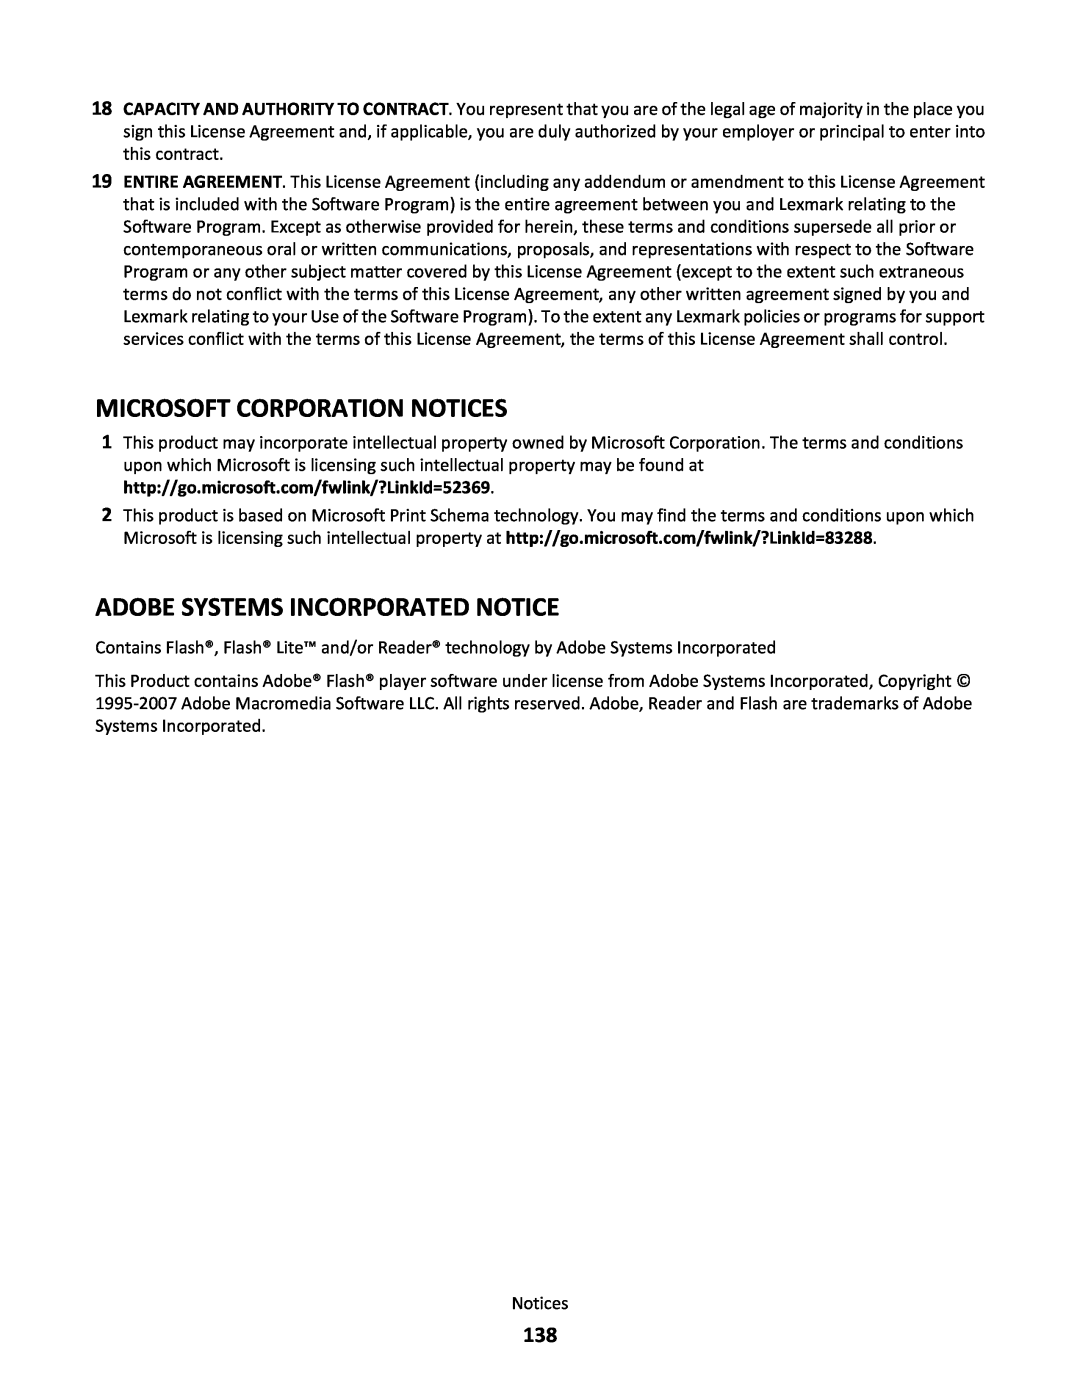 Lexmark 34S0300, 34S0100, 34S0305, 34S5164 manual Microsoft Corporation Notices, Adobe Systems Incorporated Notice 